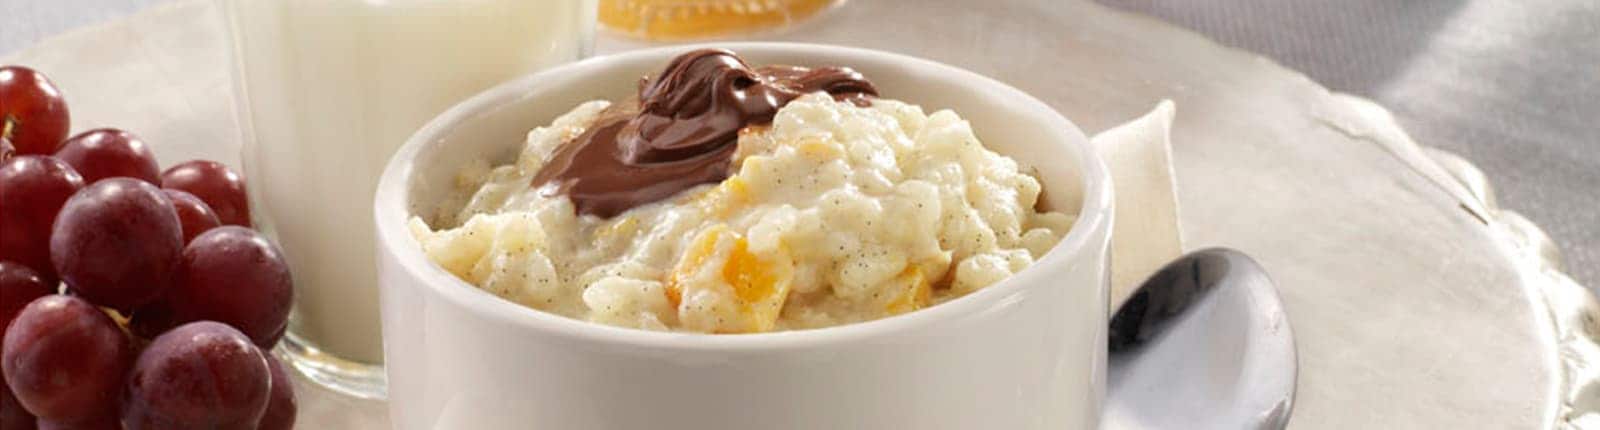 Breakfast Rice Pudding with Nutella<sup>®</sup>